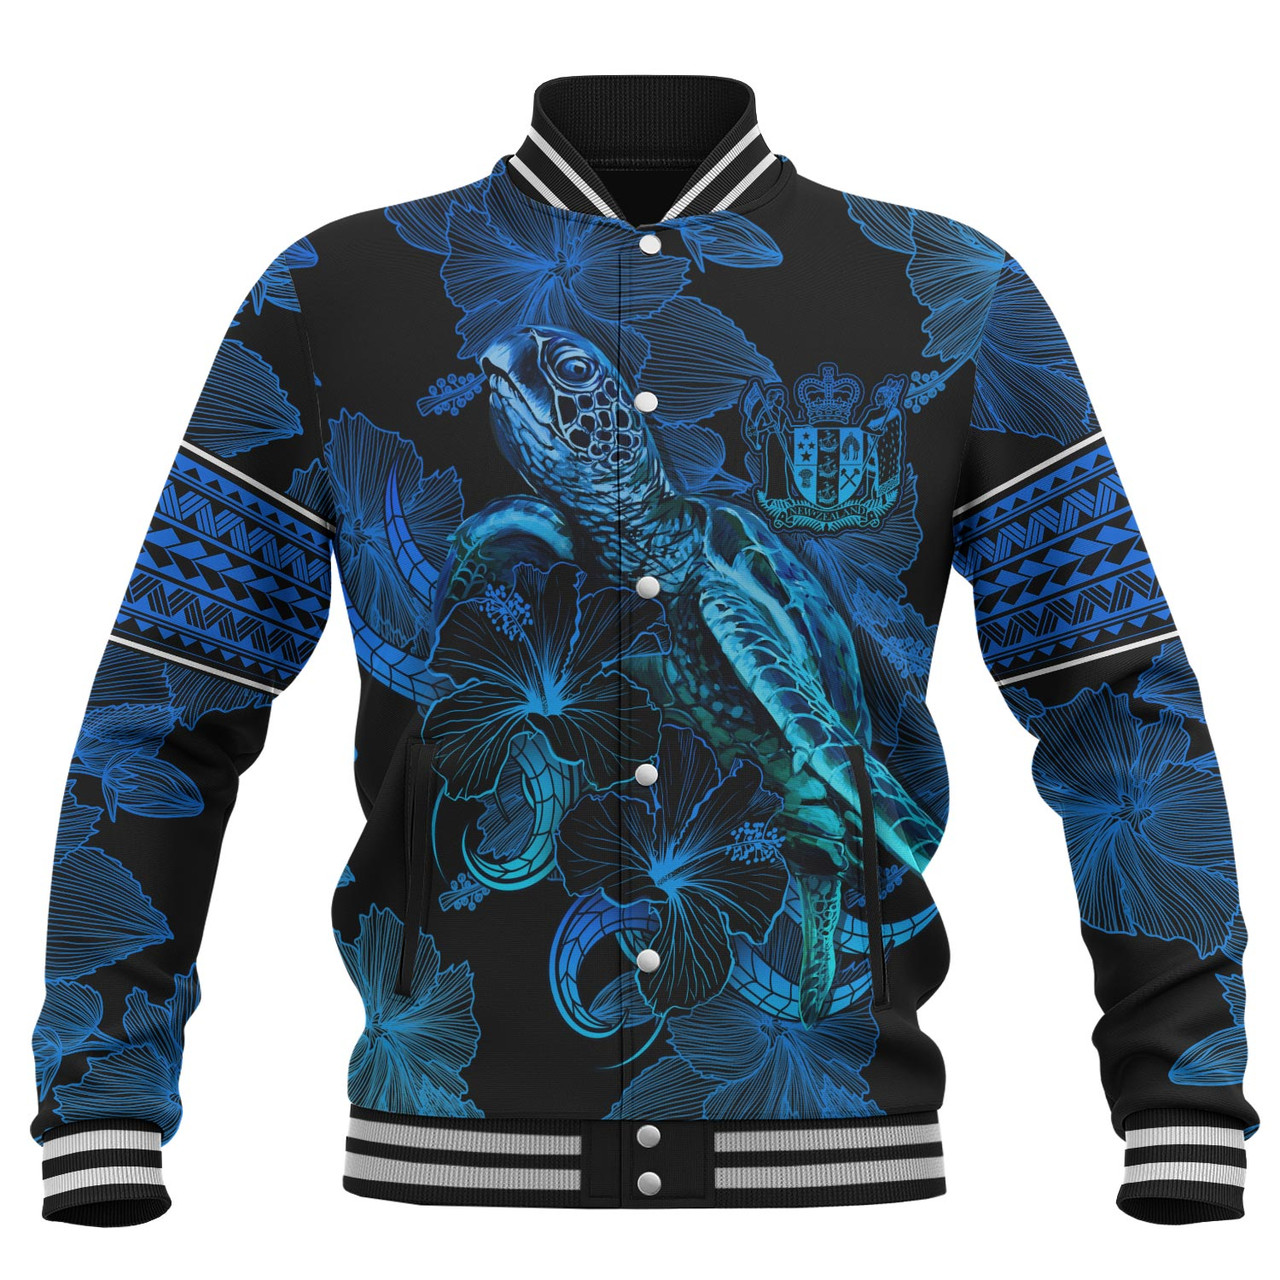 New Zealand Baseball Jacket Sea Turtle With Blooming Hibiscus Flowers Tribal Blue